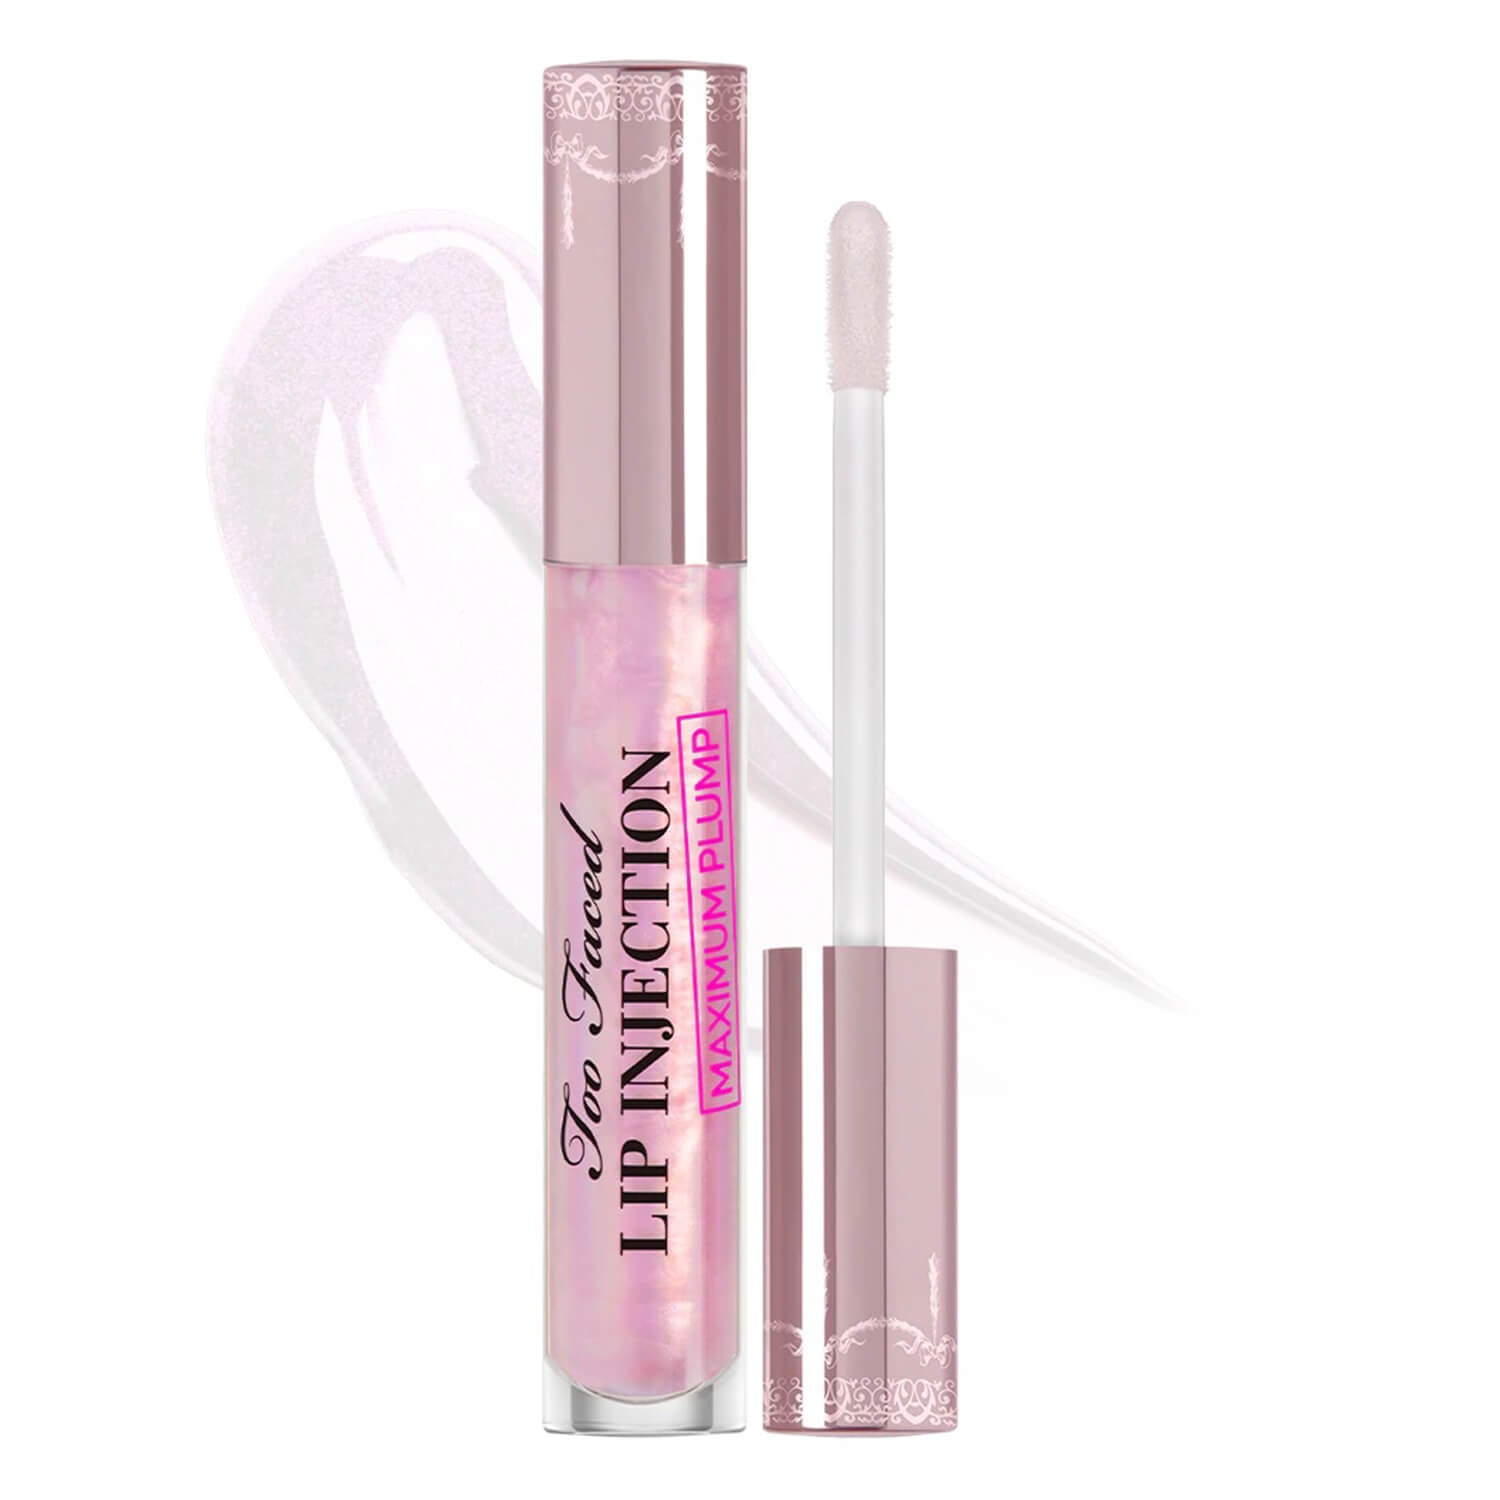 Shop Too Faced Cosmetics Lip injection maximum lip plumper available at Heygirl.pk for delivery in Pakistan.